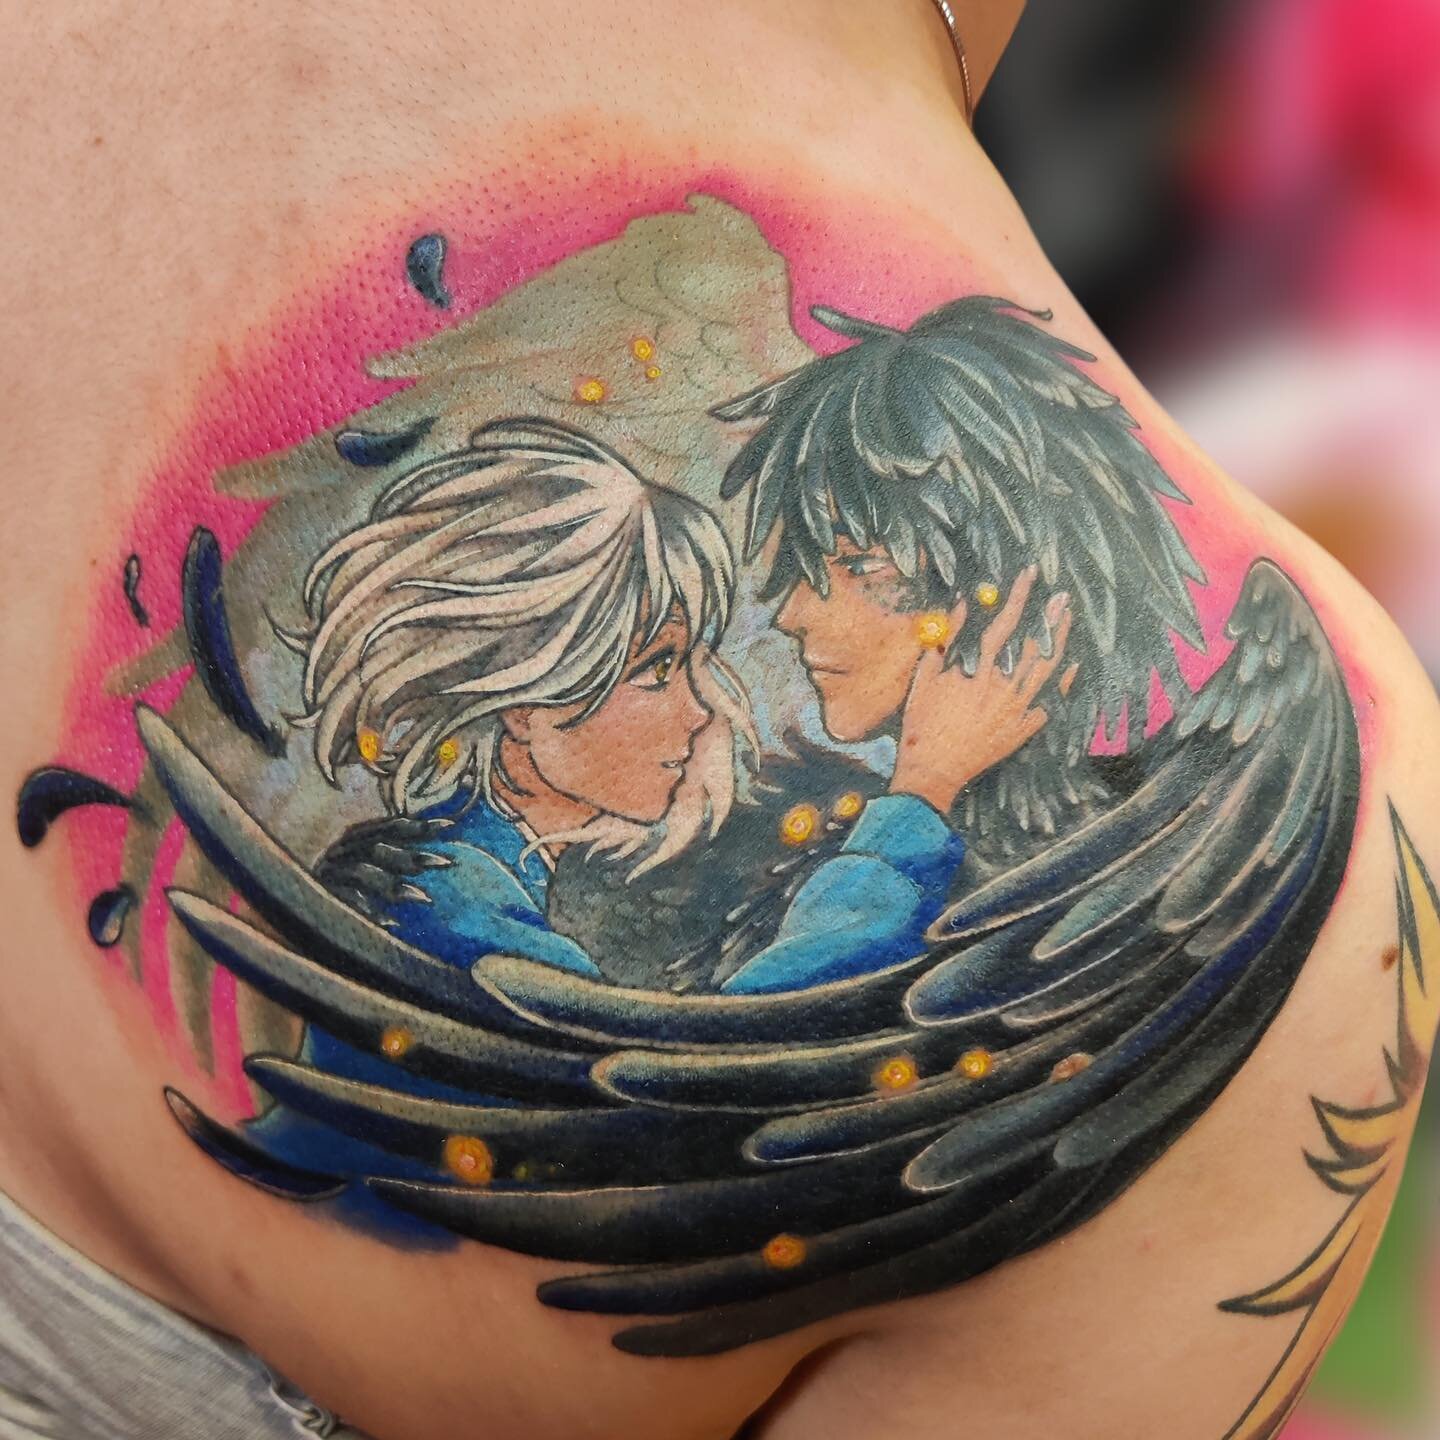 🪶 H O W L &bull; S O P H I E 🪶 
&gt;&gt;&gt;Swipe for before&gt;&gt;&gt;

So excited I got to do this howls moving castle piece on @alanisjade24 
This is mostly healed with a the background, hair, and touch up on the wings. I posted a reel along wi